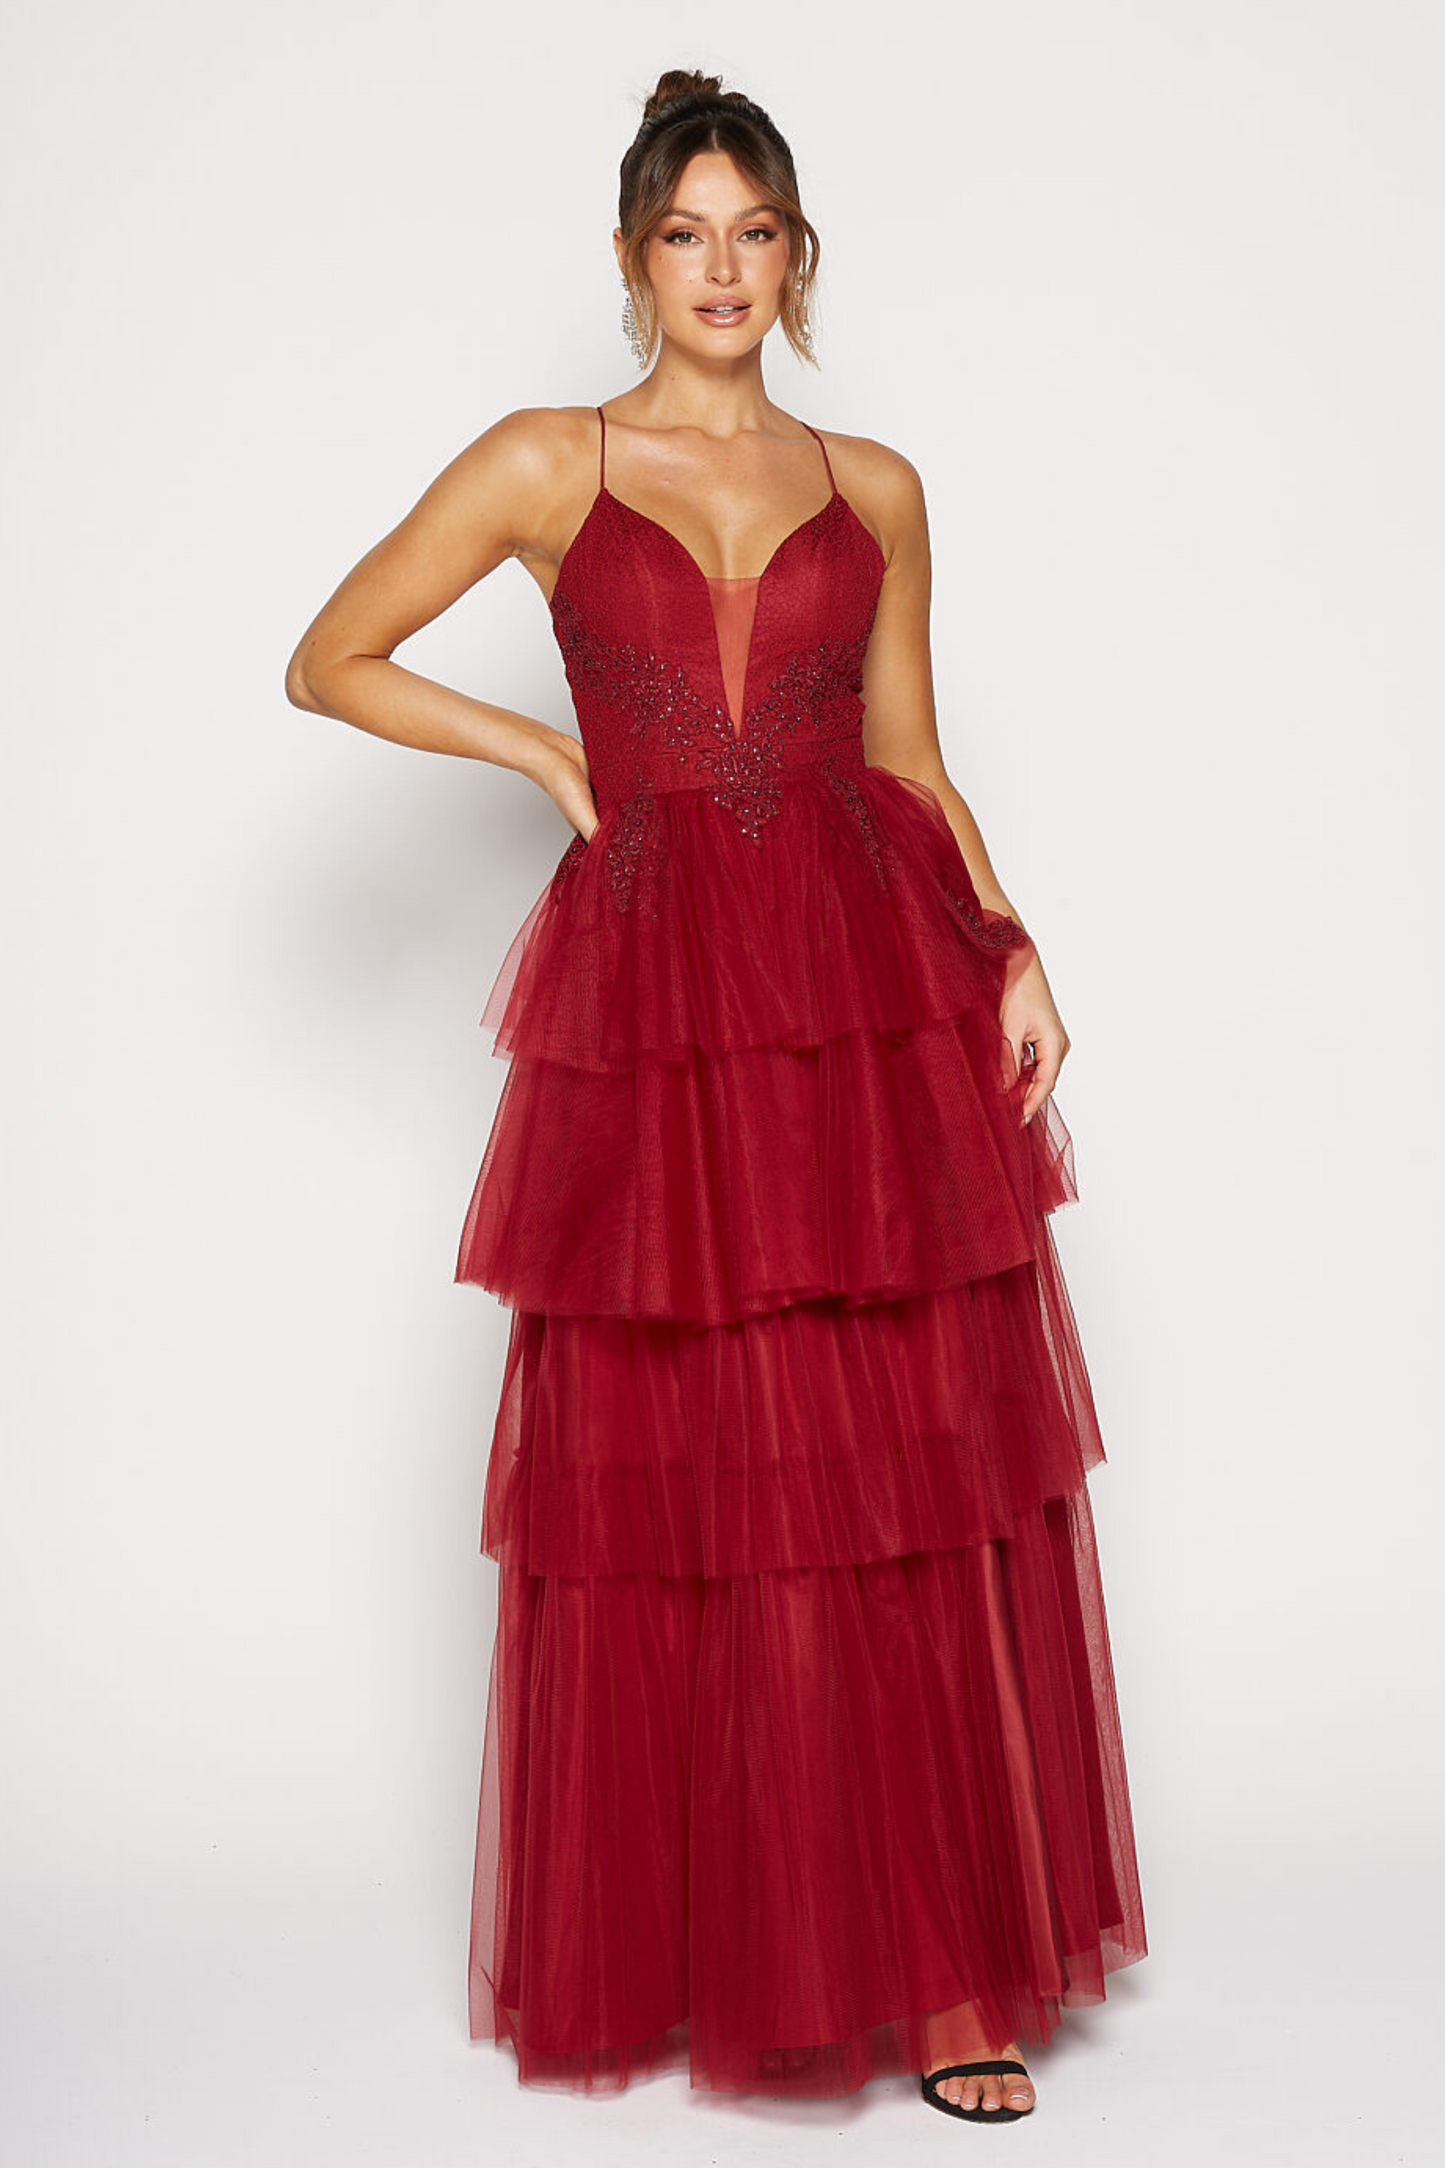 Tania Olsen a-line formal dress in wine beaded lace and tulle